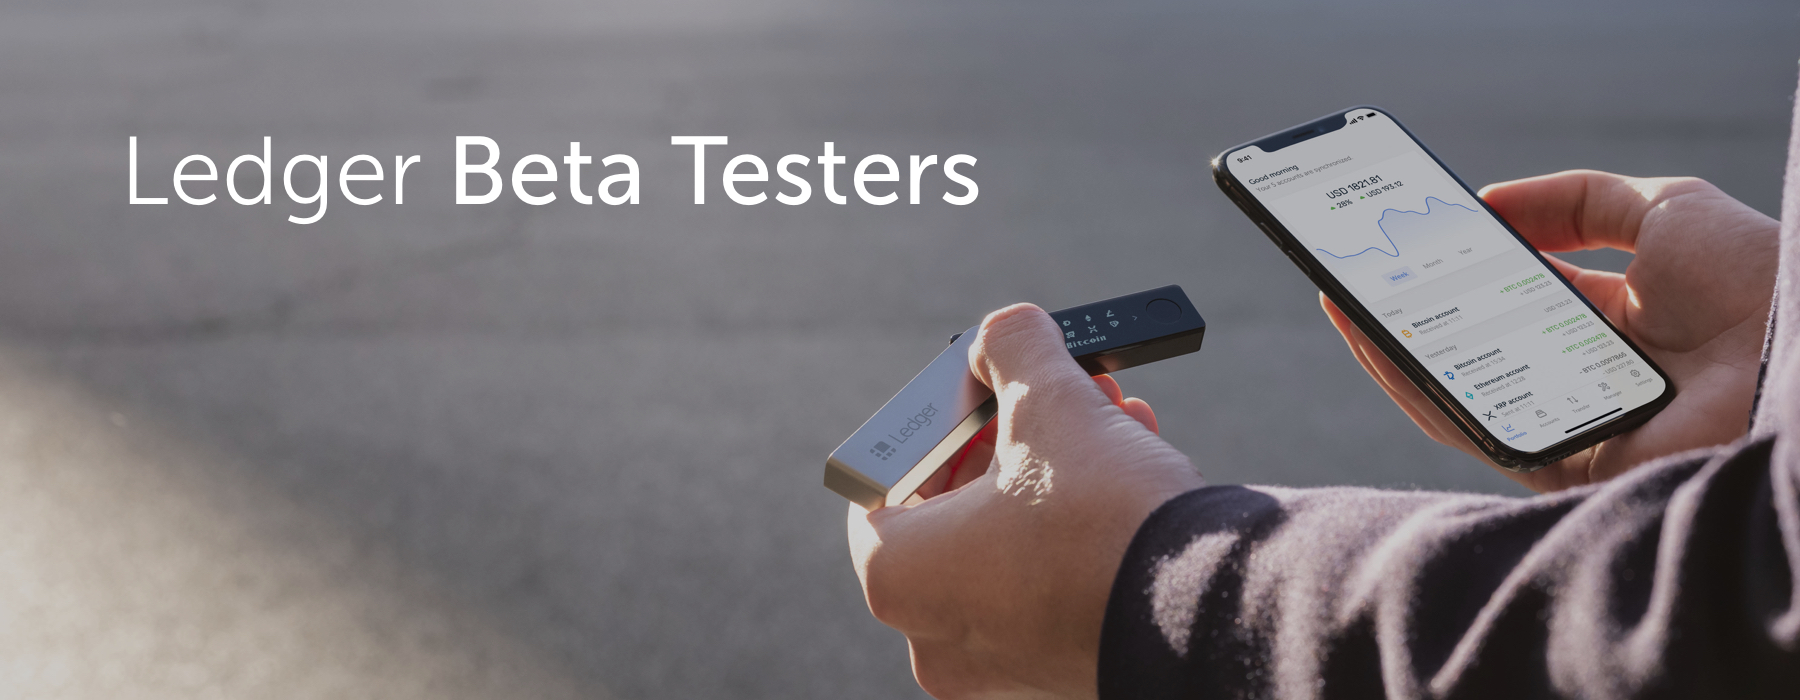  community beta ledger testers testing products join 